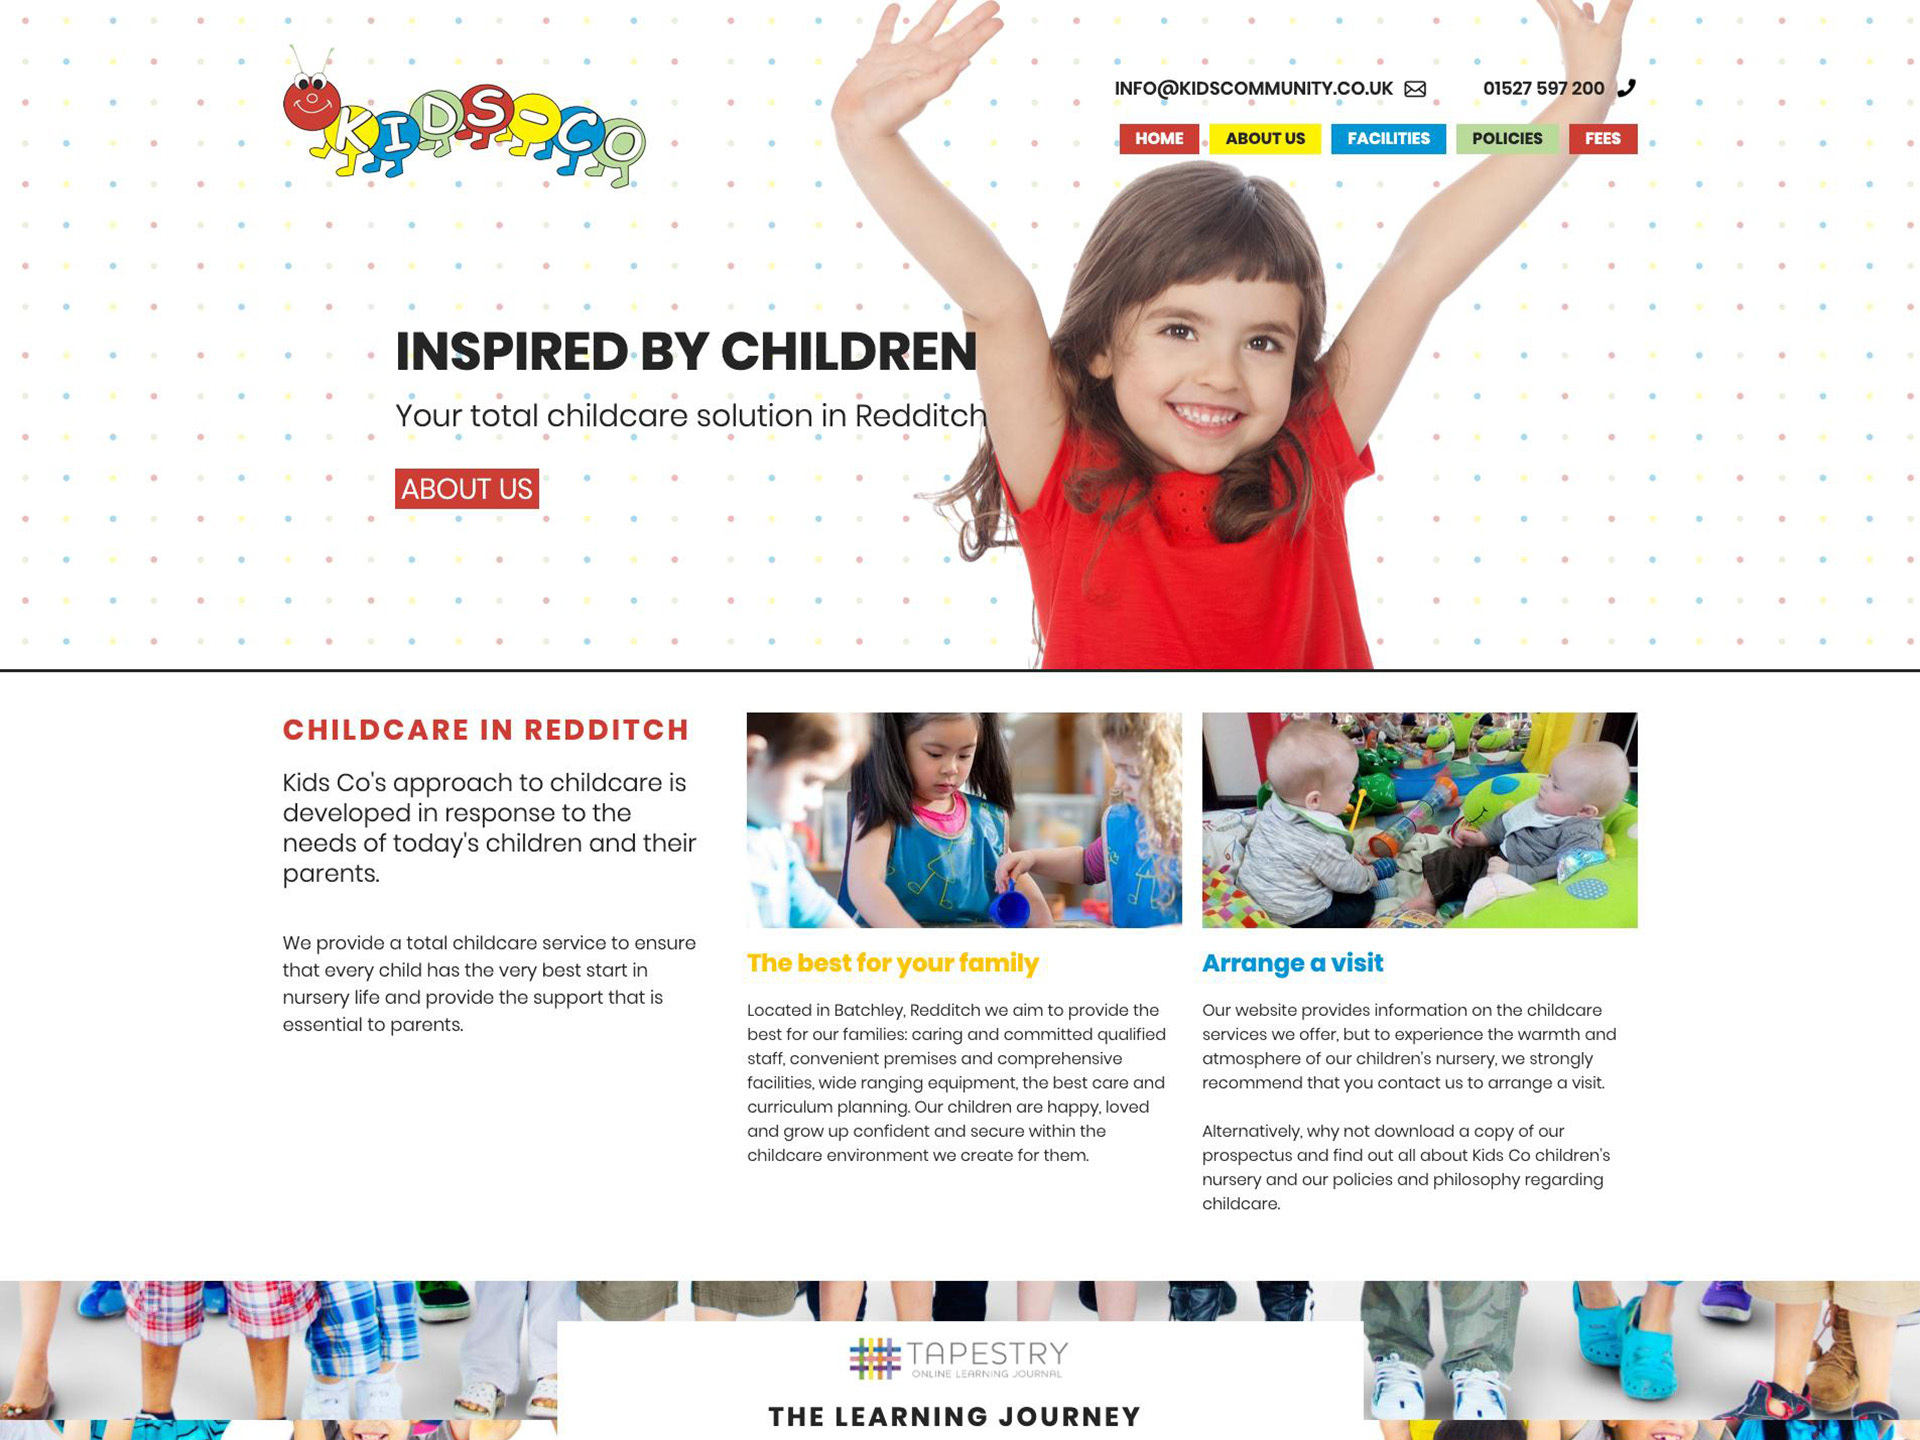 An example of website design in Solihull